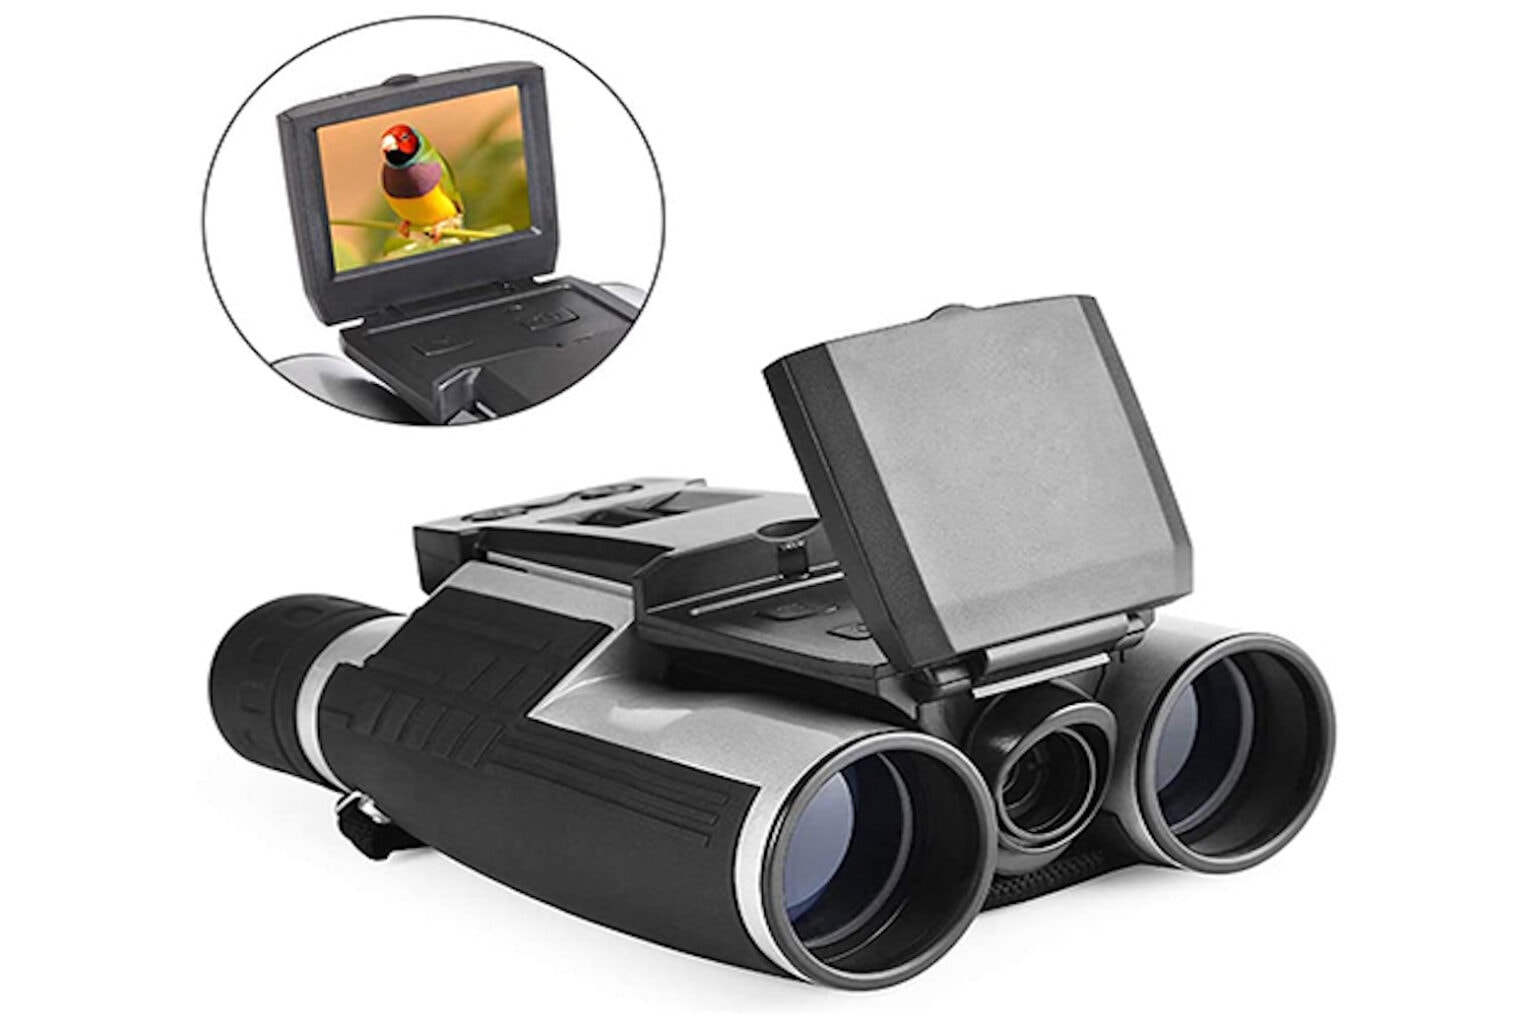 Don't wait for Prime Day to get these HD digital camera binoculars for under $100.